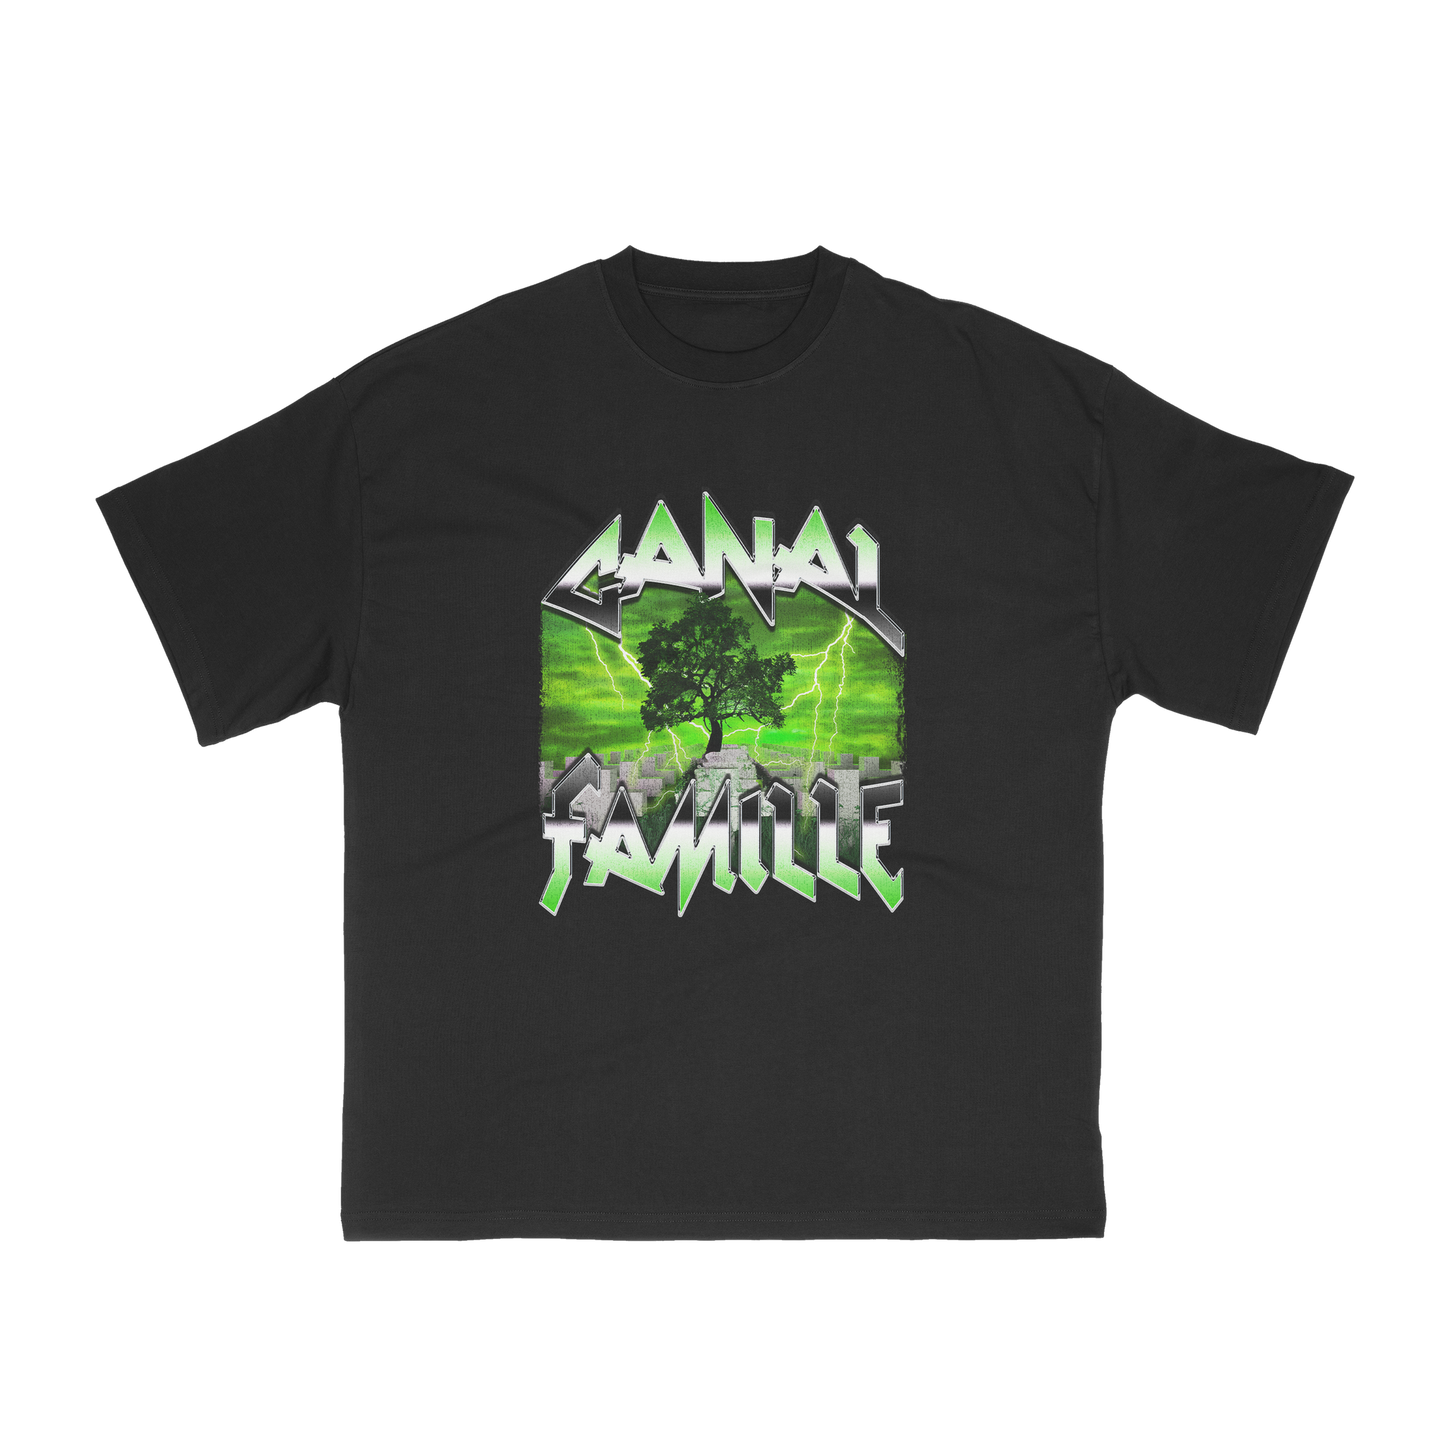 Canal Famille (Metal T-Shirt)